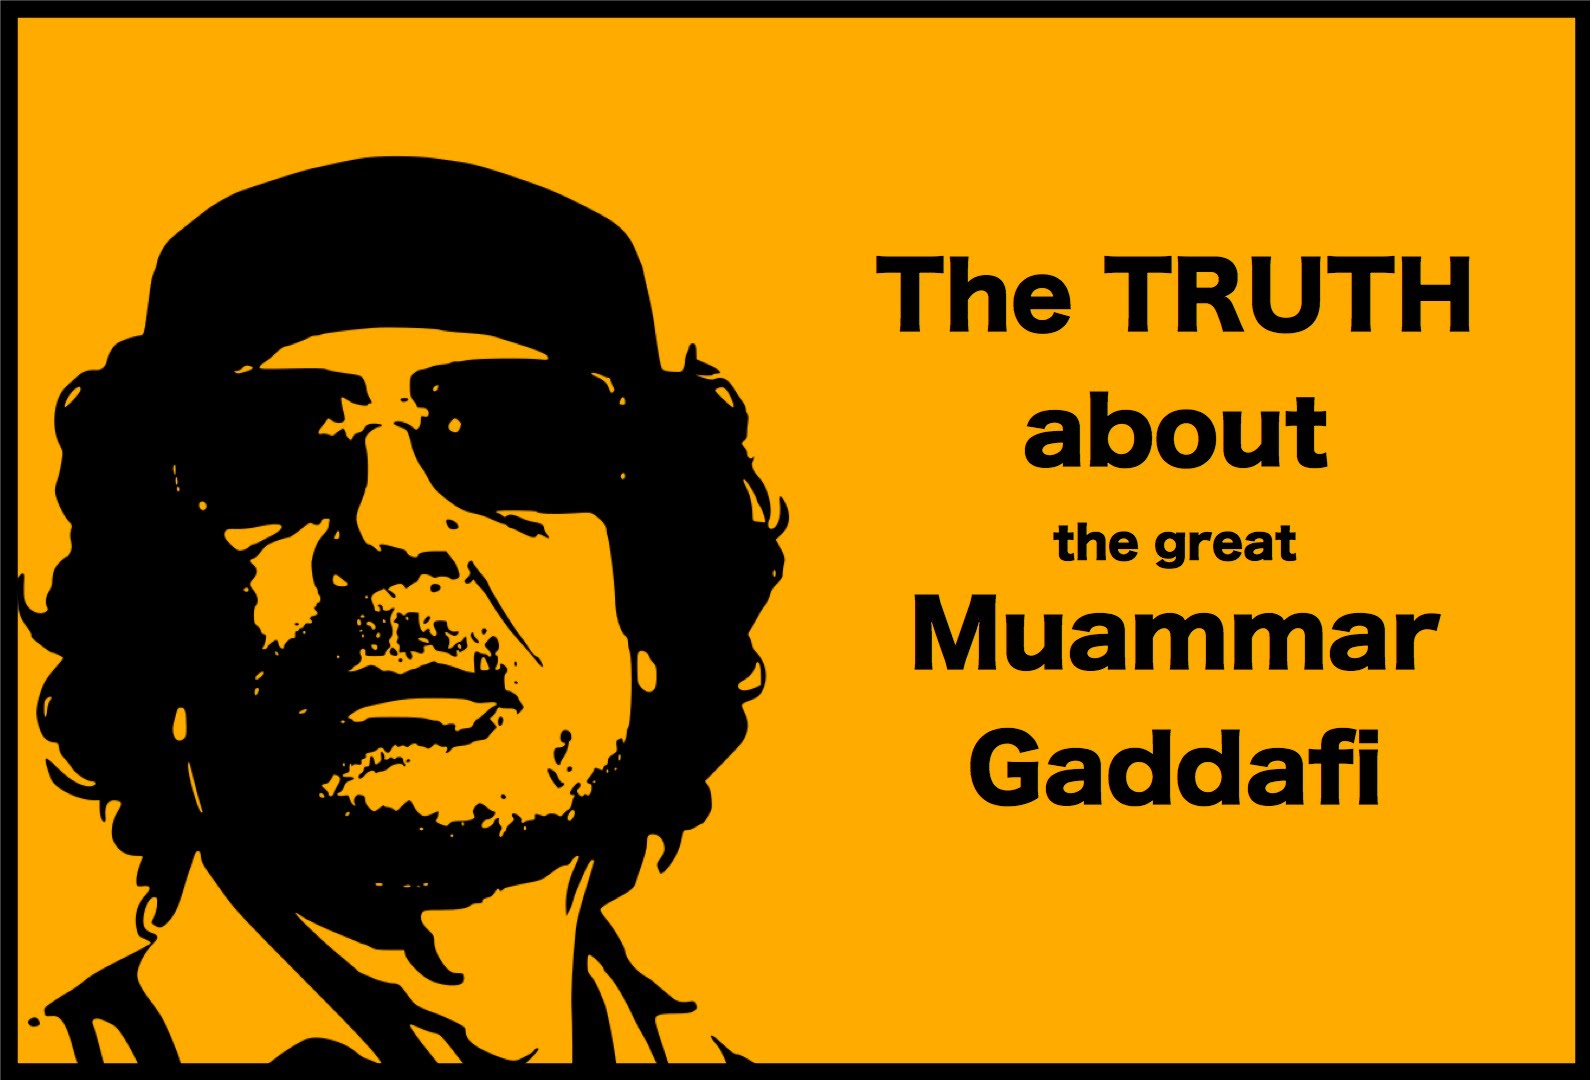 The GREAT Muammar Gaddafi.  If the western world only knew the truth.